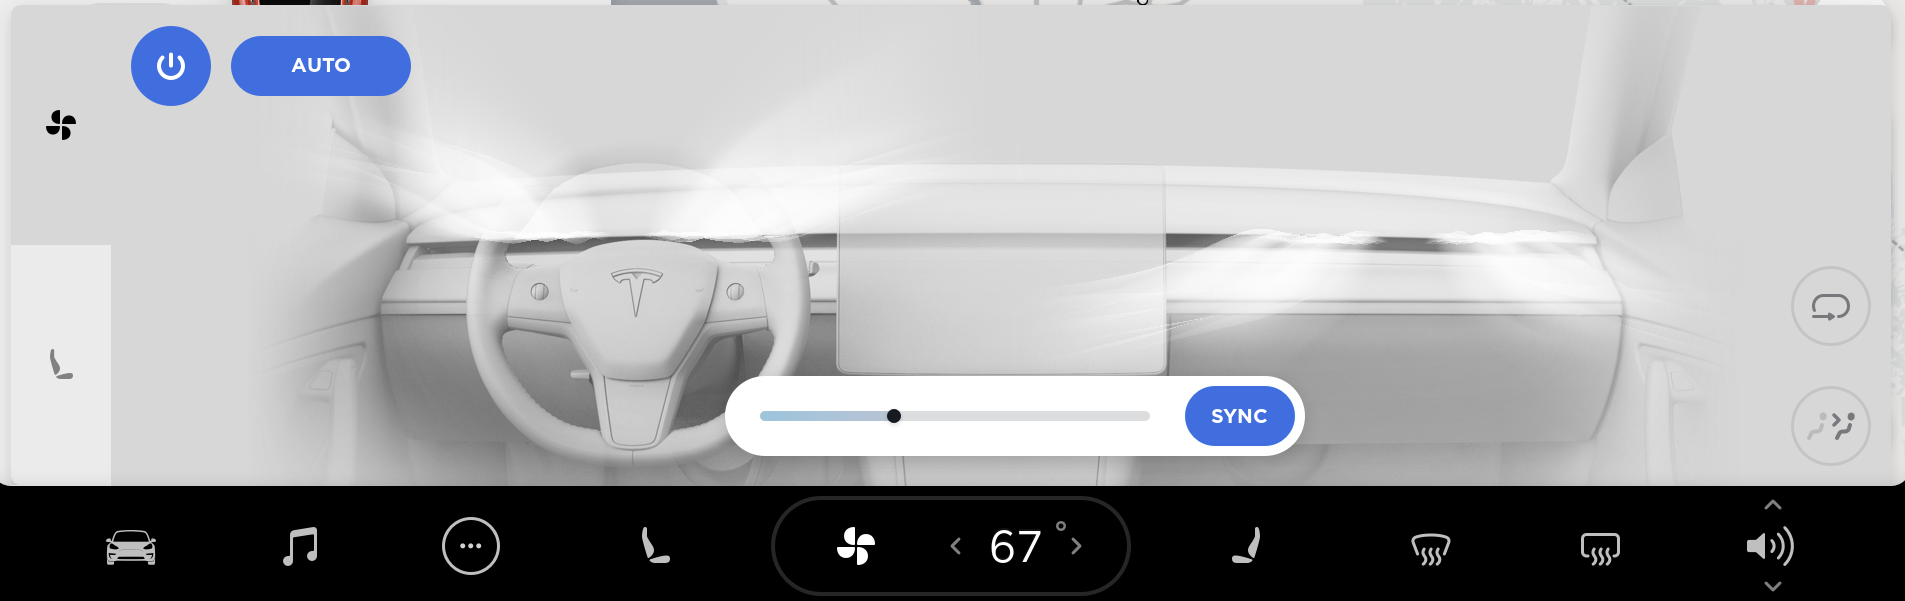 Tesla Climate Control feature in update 2018.39.0.1